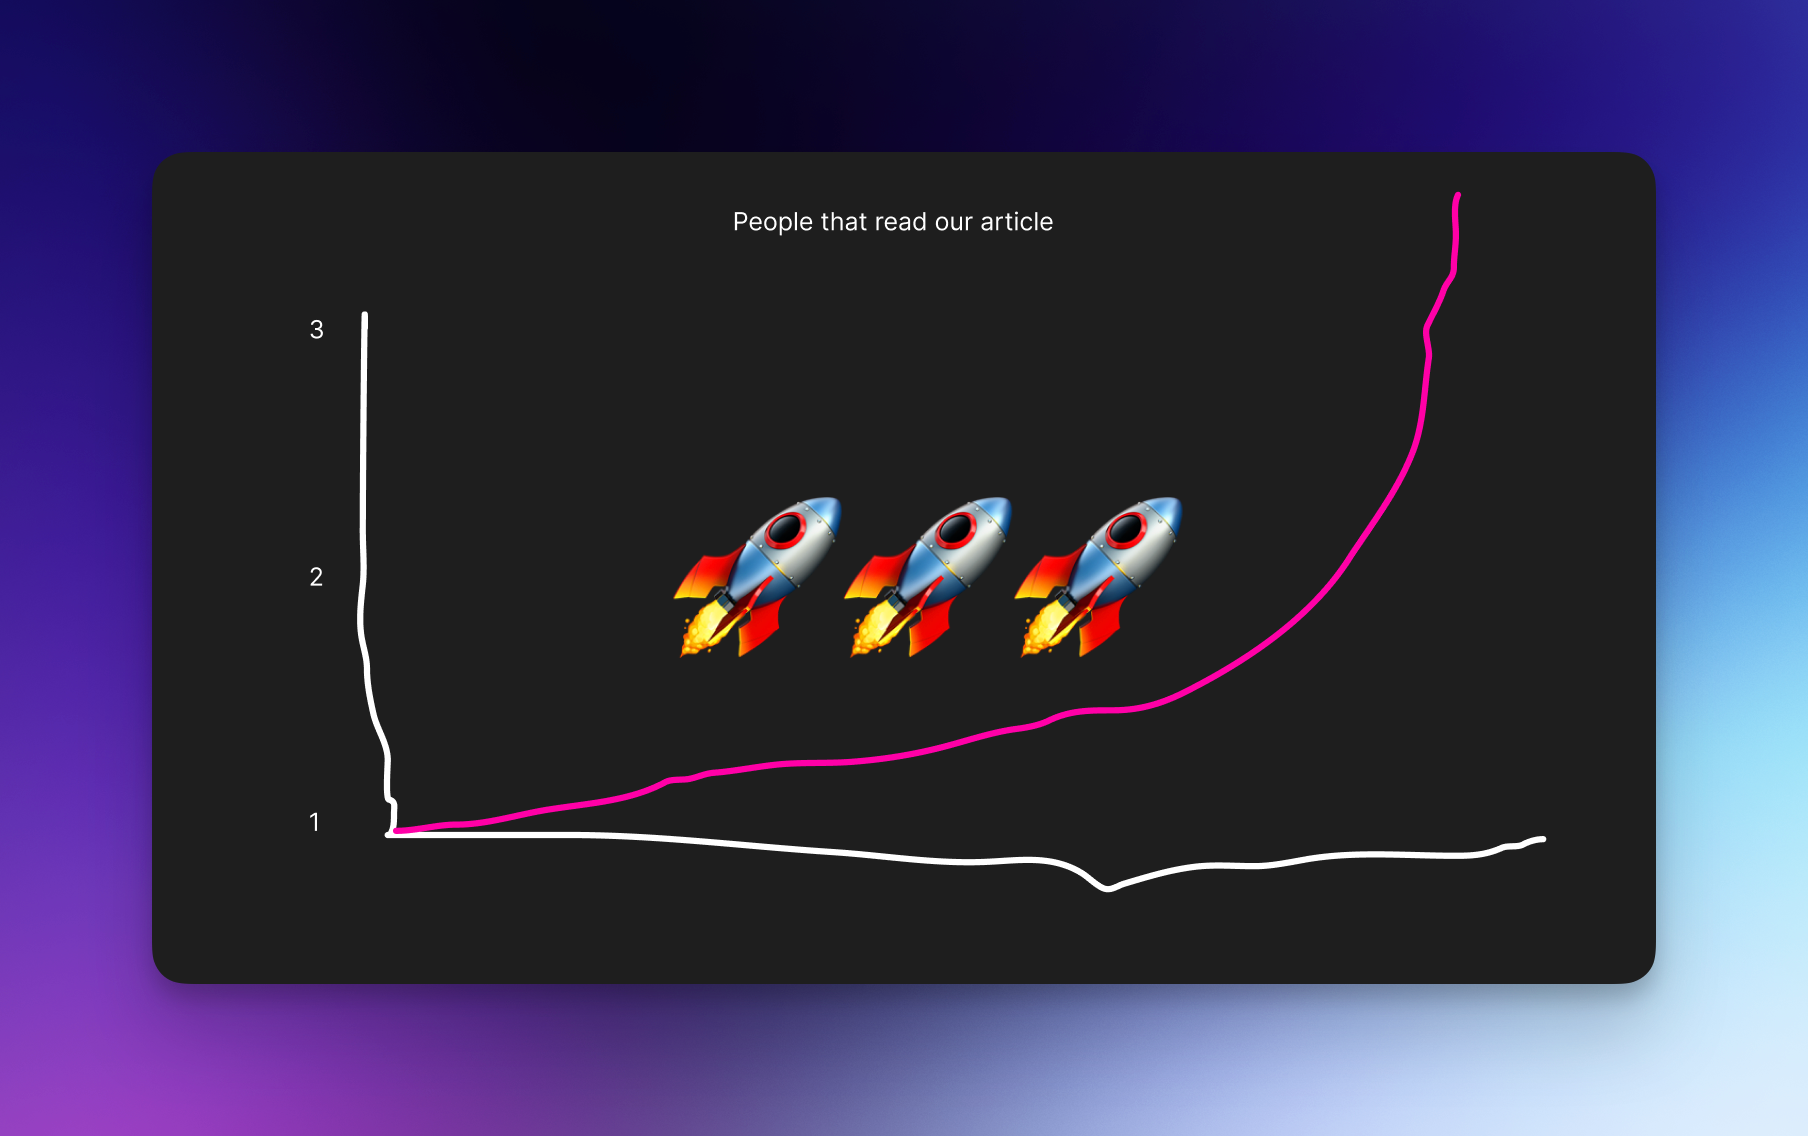 A graph exploding with a skyrocketing line, for the 2 people that read the article